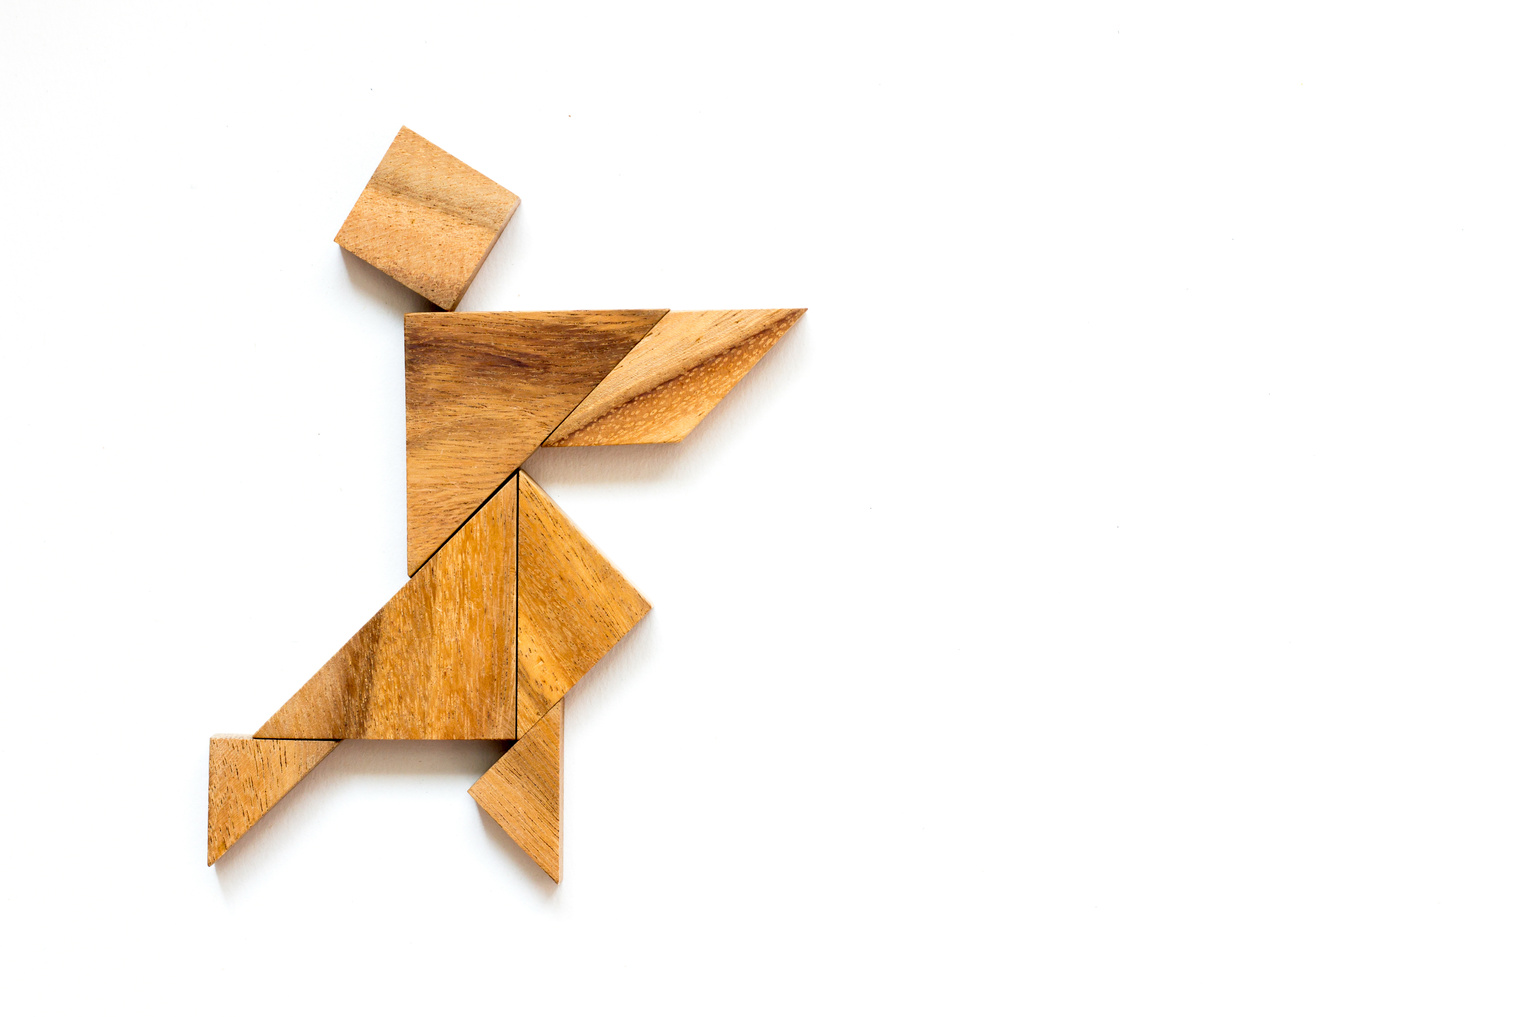 Wooden tangram as man  holding thing shape on white background